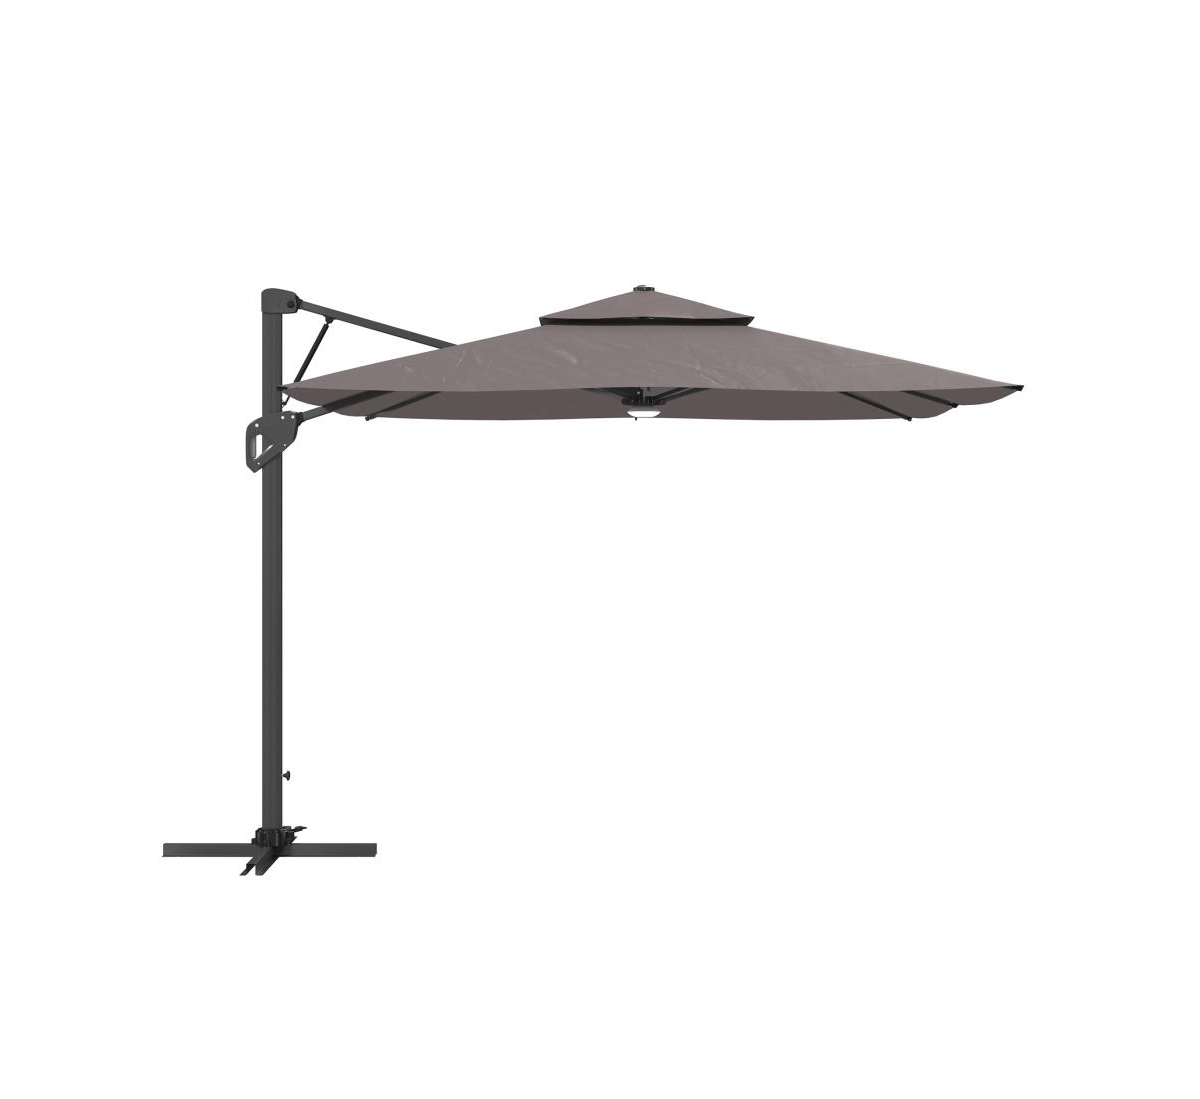 10ft Square Solar Led Offset Cantilever Outdoor Patio Umbrella with Bluetooth Speaker and Included Base - Dark gray